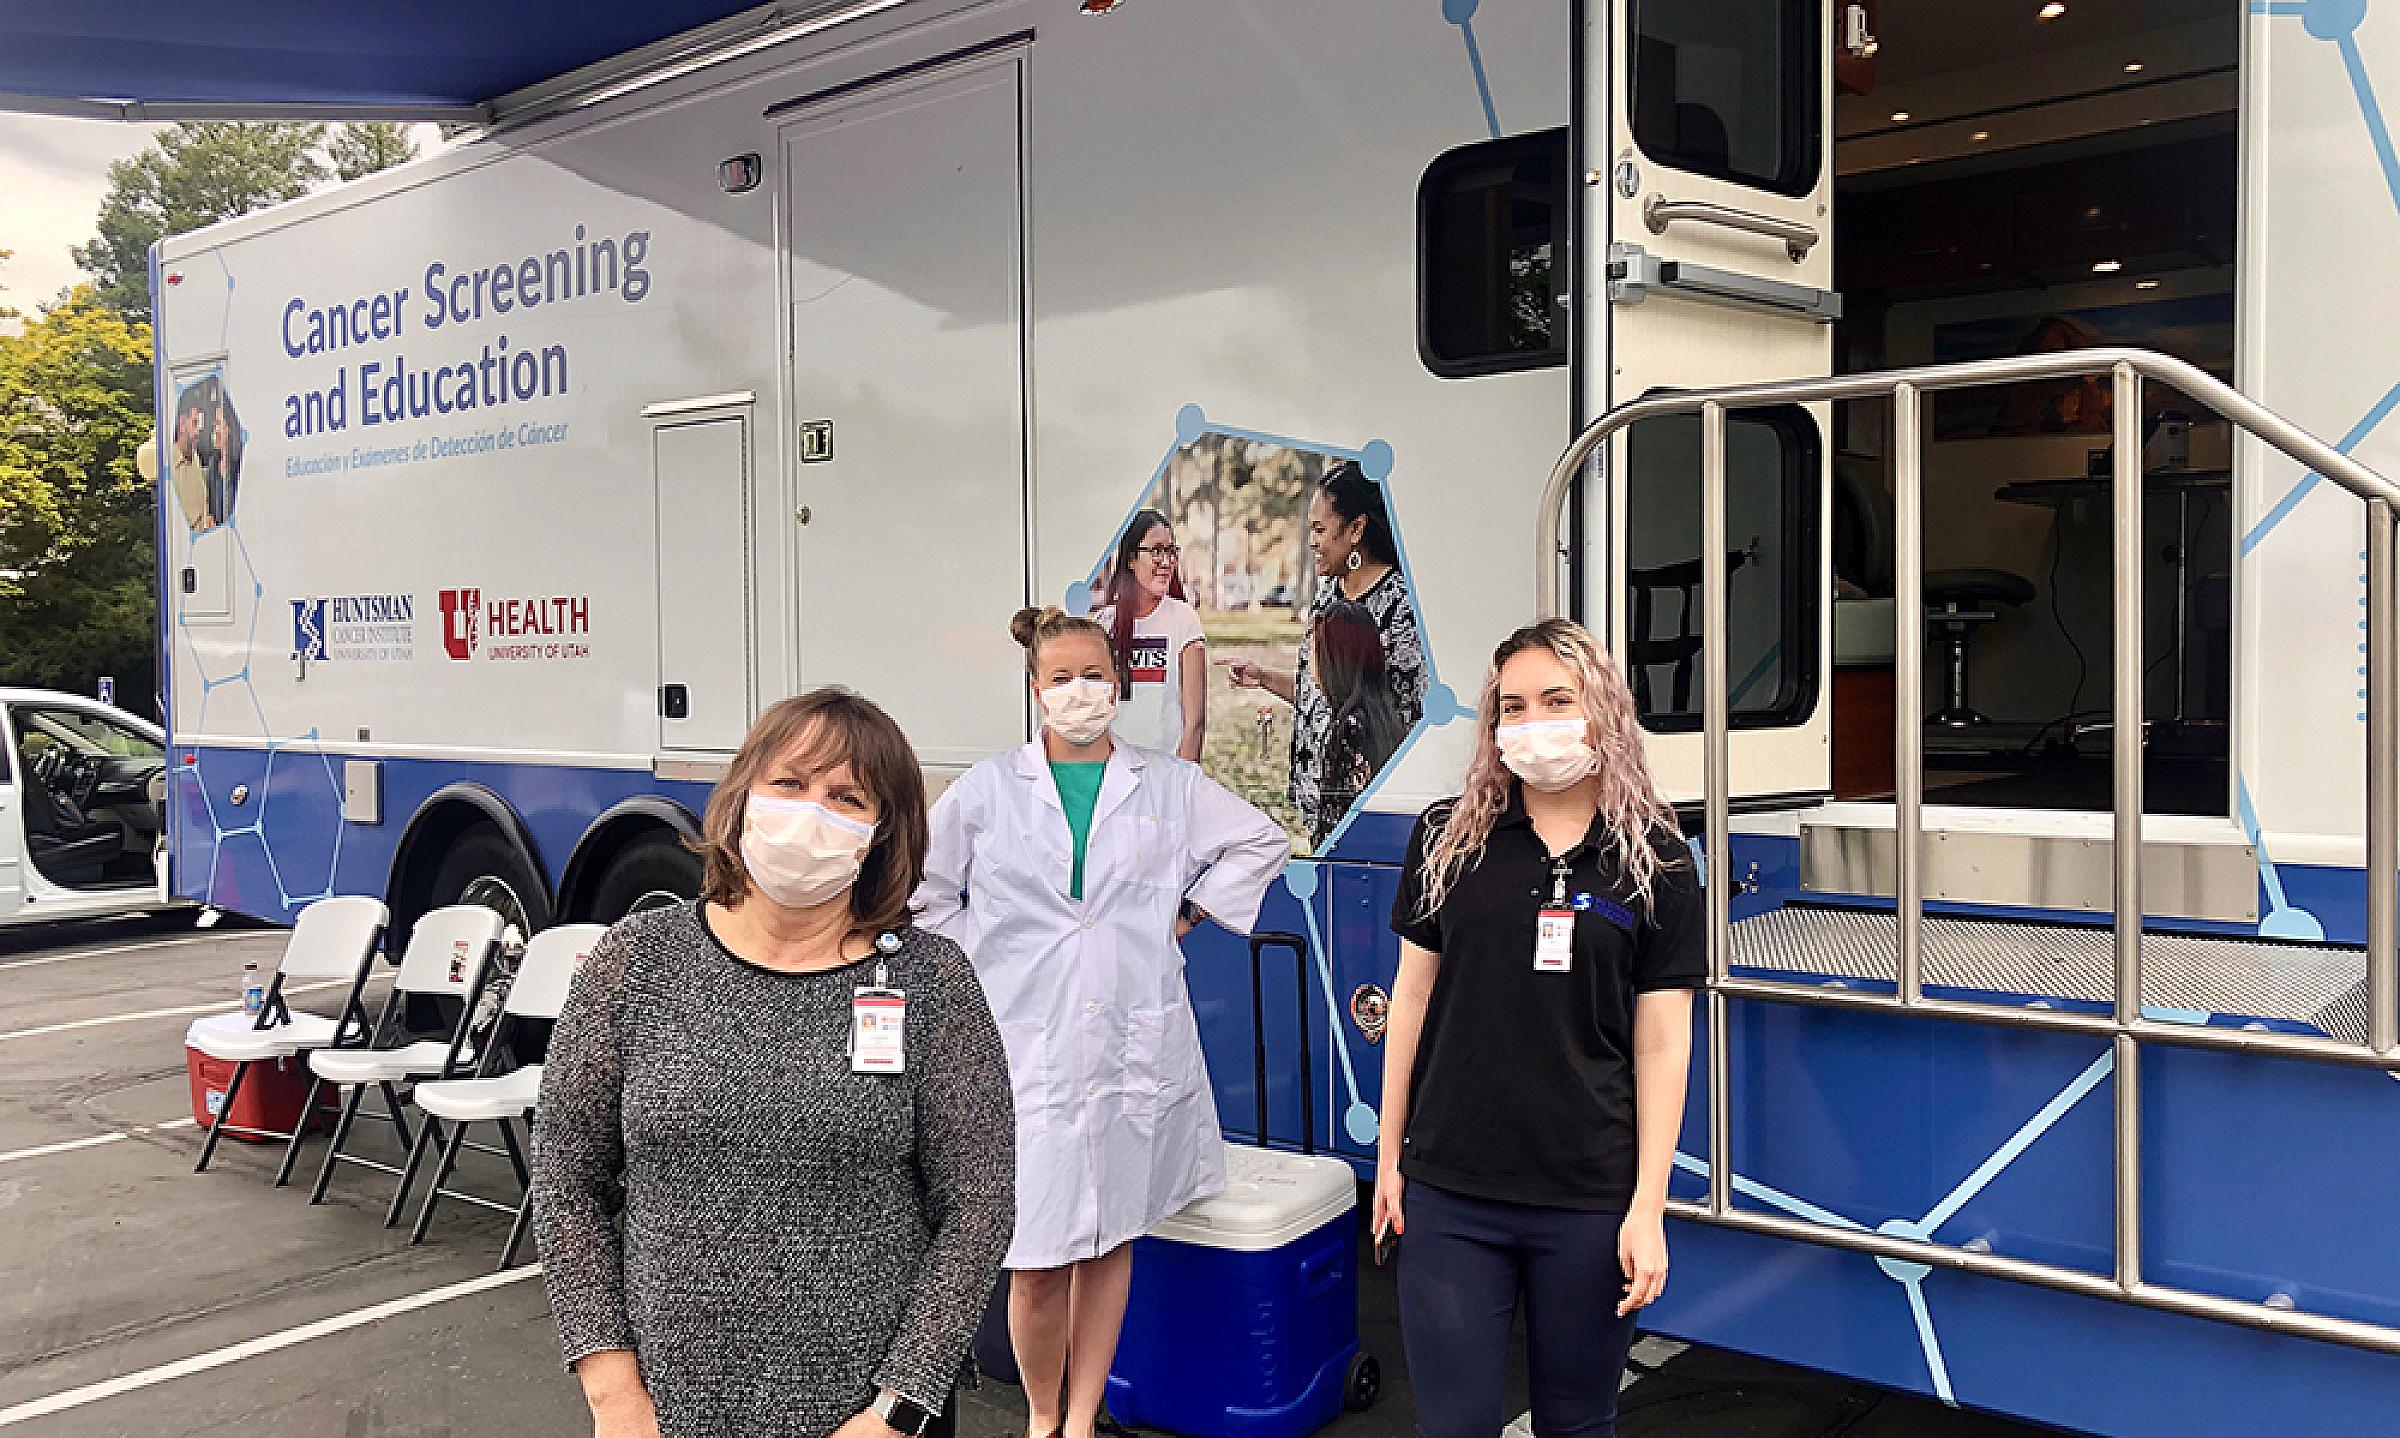 Staff members standing in front of the Cancer Screening and Education Bus